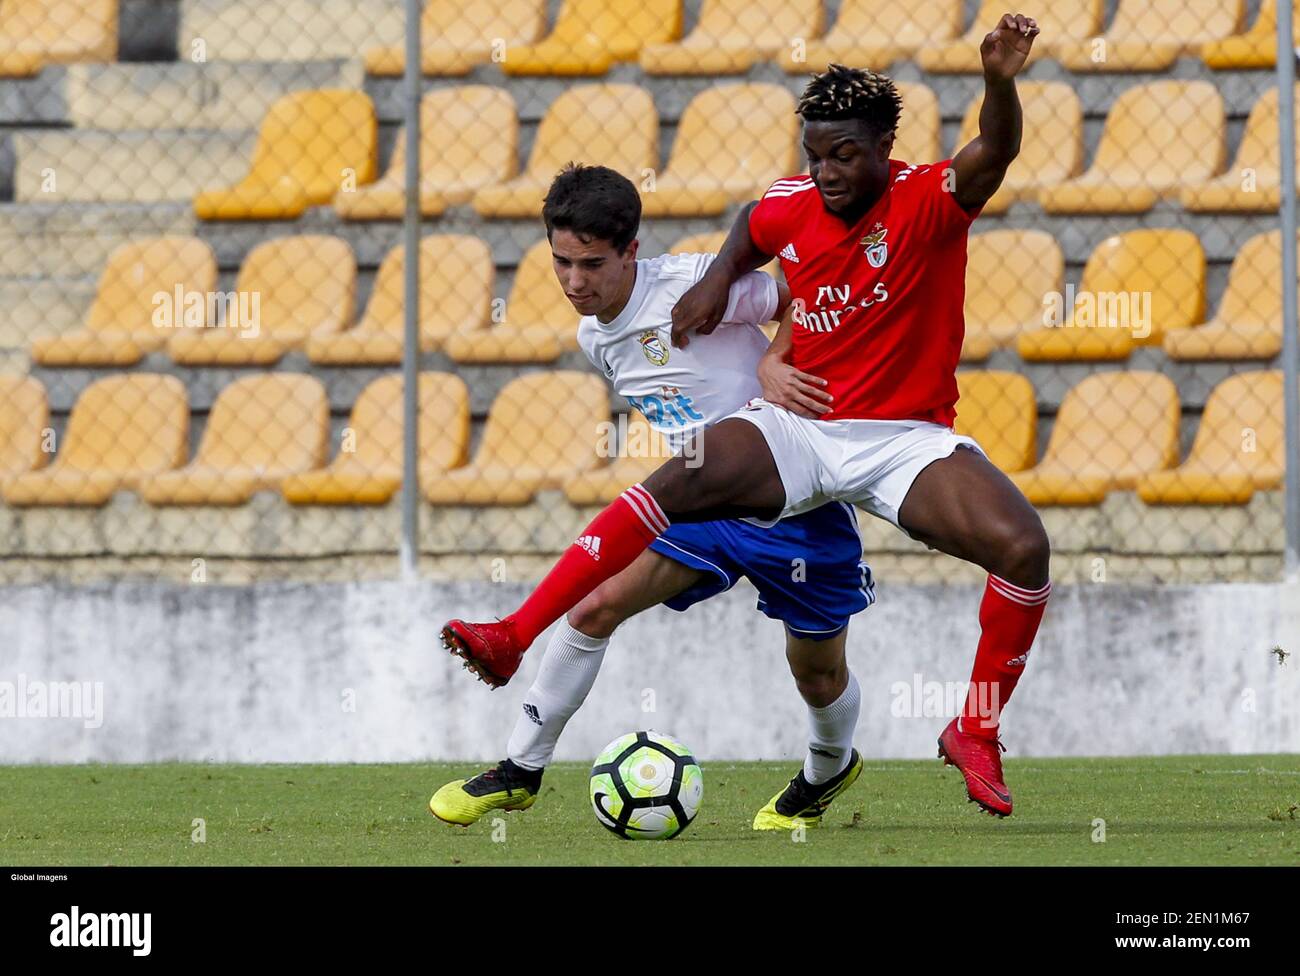 Vila Franca de Xira, 05/19/2019 - Alverca Football Club received this  afternoon the Sport Lisboa e Benfica in the Sports Complex of Alverca, in  game to count for the 12th Game of